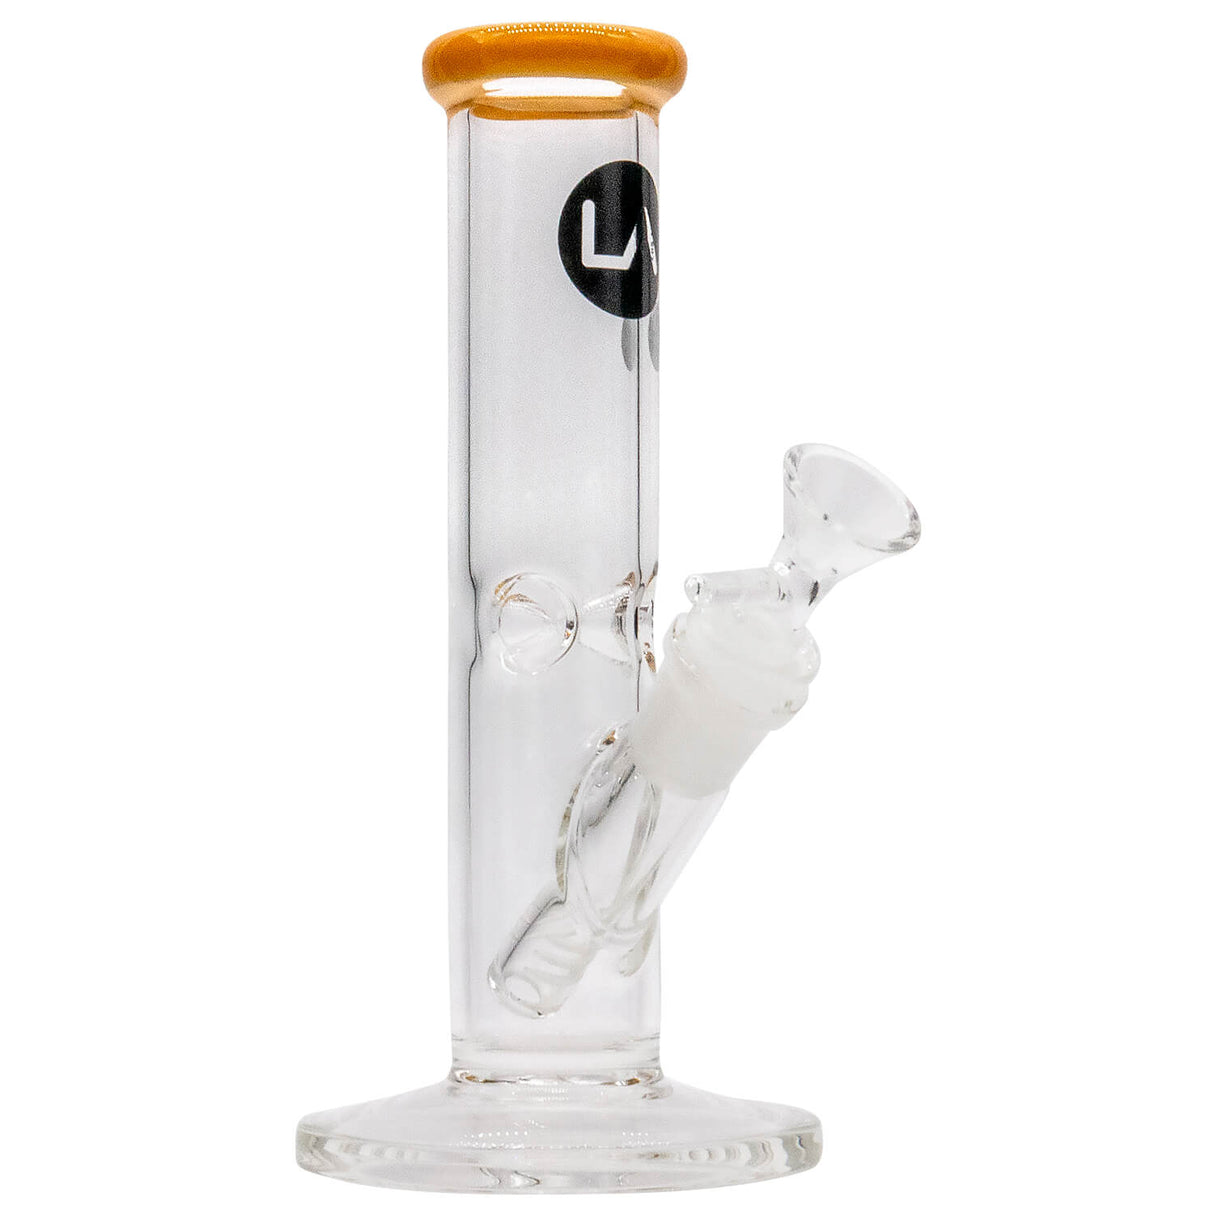 LA Pipes 8" Straight Shooter Bong in Amber, Front View, 38mm Diameter, Borosilicate Glass